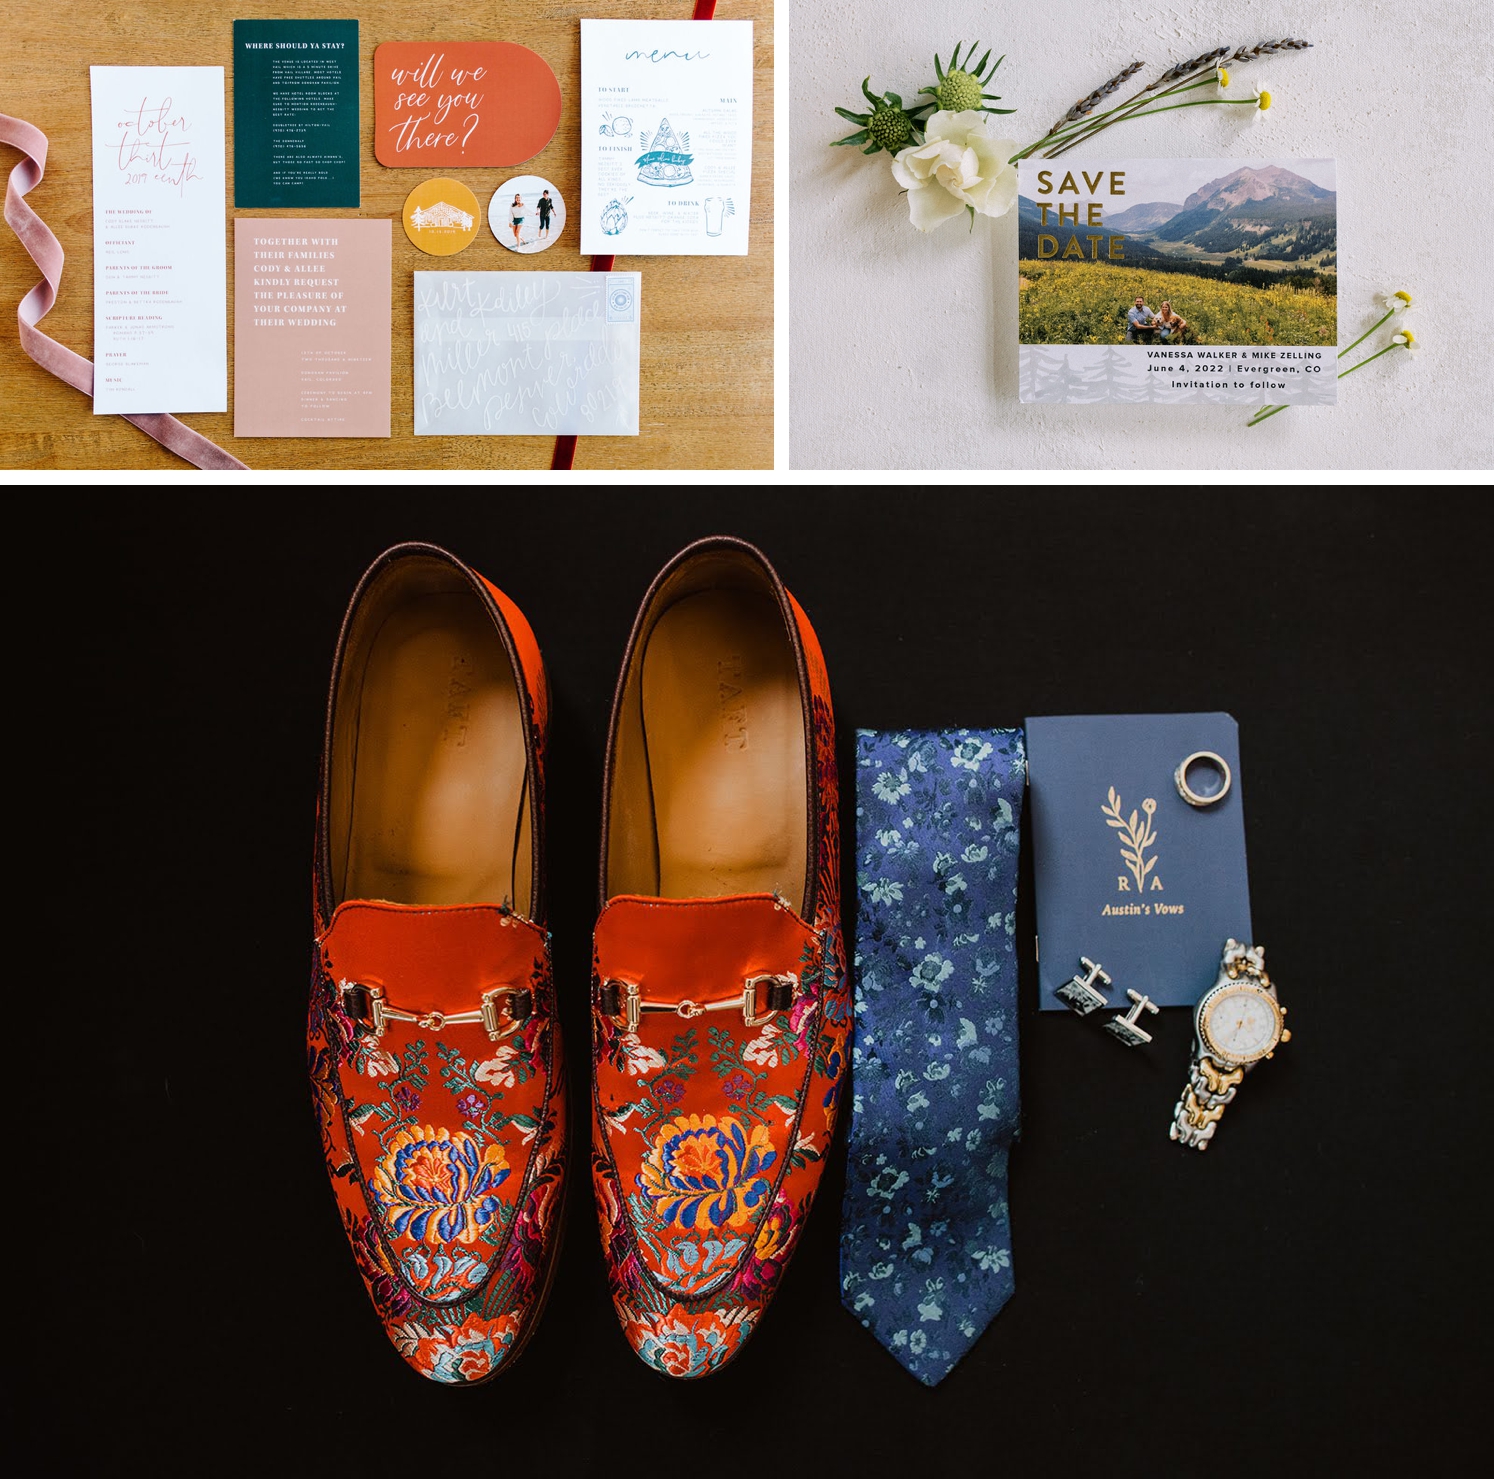 Modern, colorful wedding invitation suite and stationery | Colorado mountain save the date | custom vow book with groom's red floral shoes, blue floral tie, and cuff links | McArthur Weddings and Events